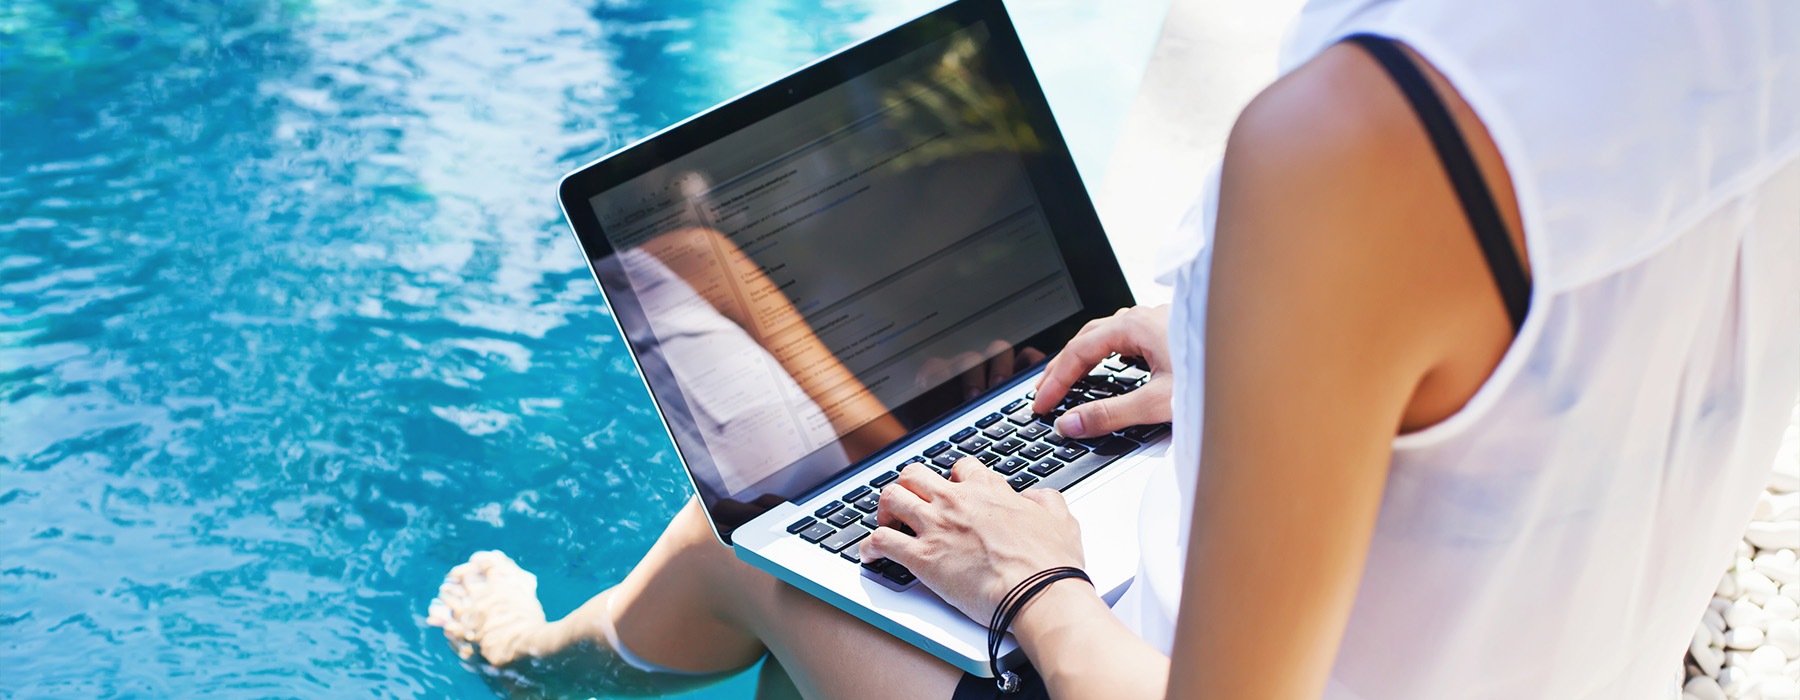 a person on a laptop with their feet in a pool